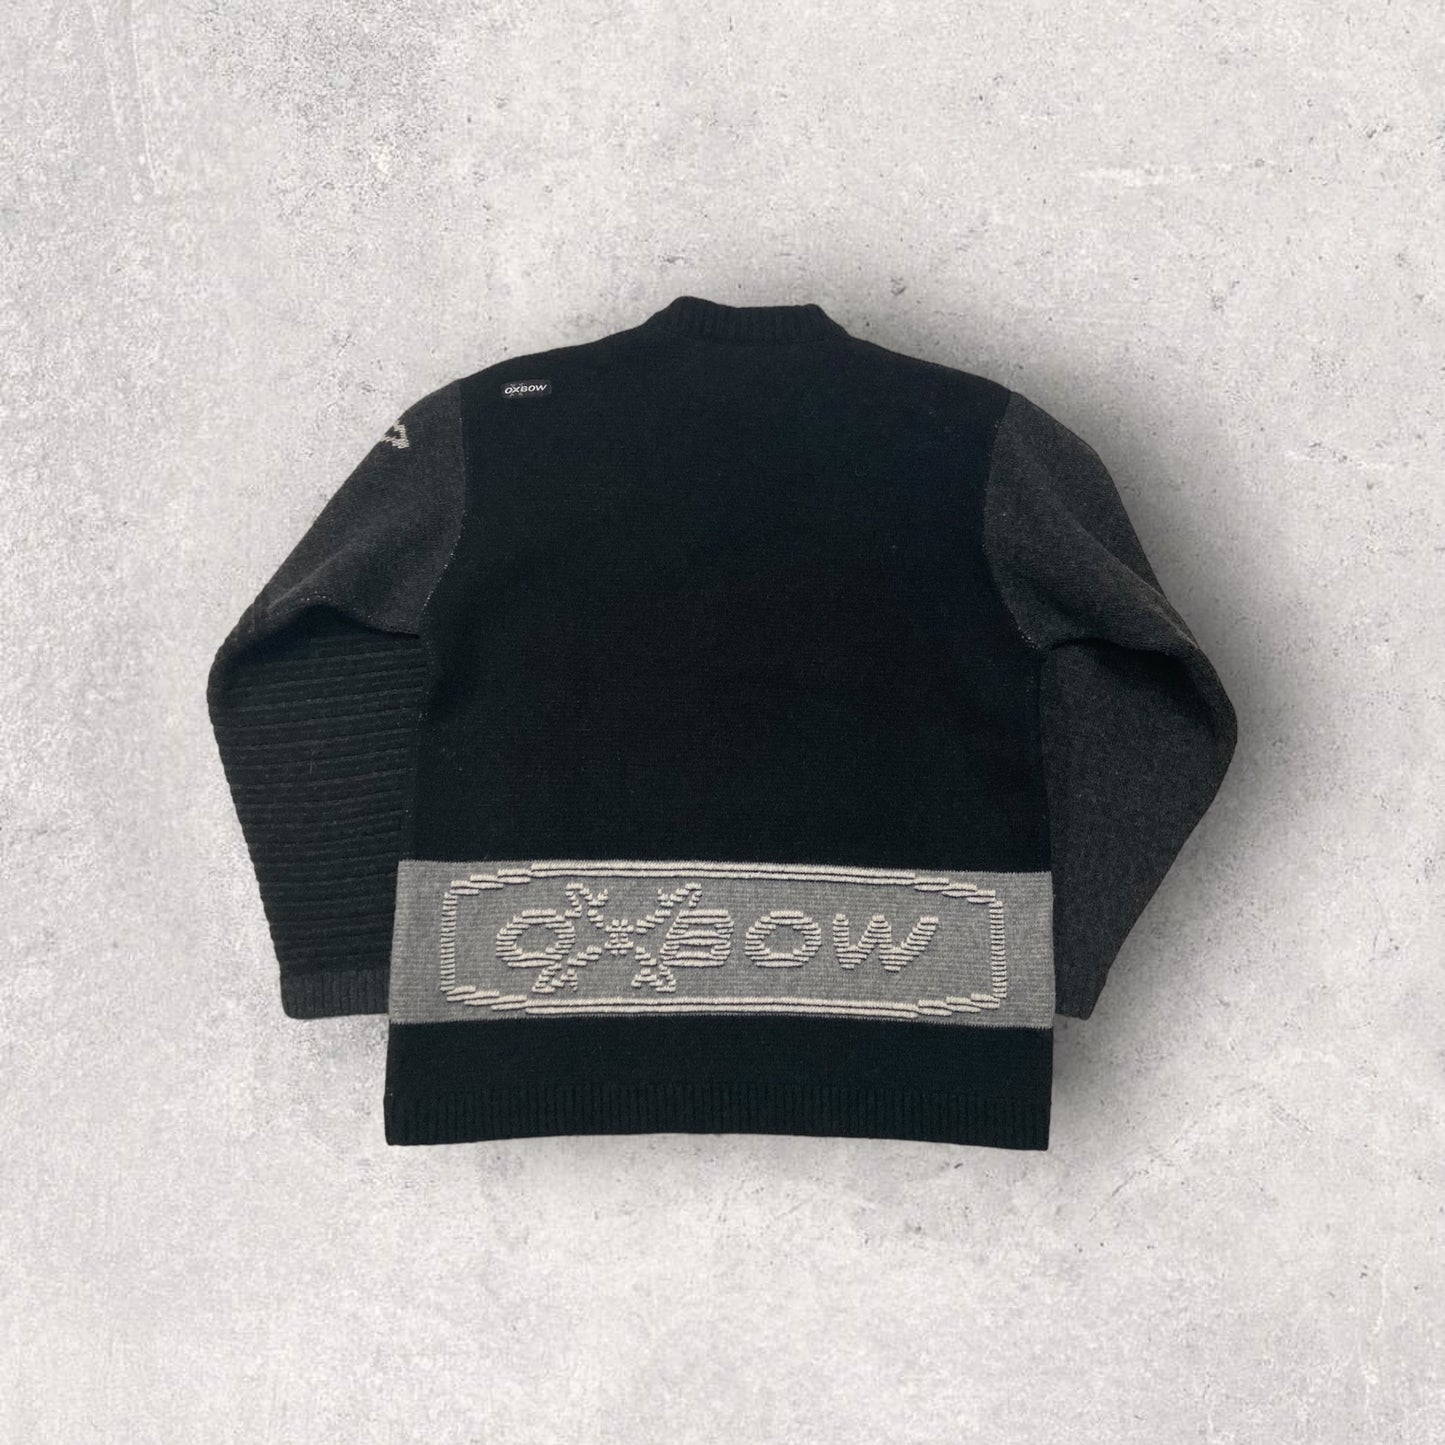 Oxbow 00s Vintage Sweater - L